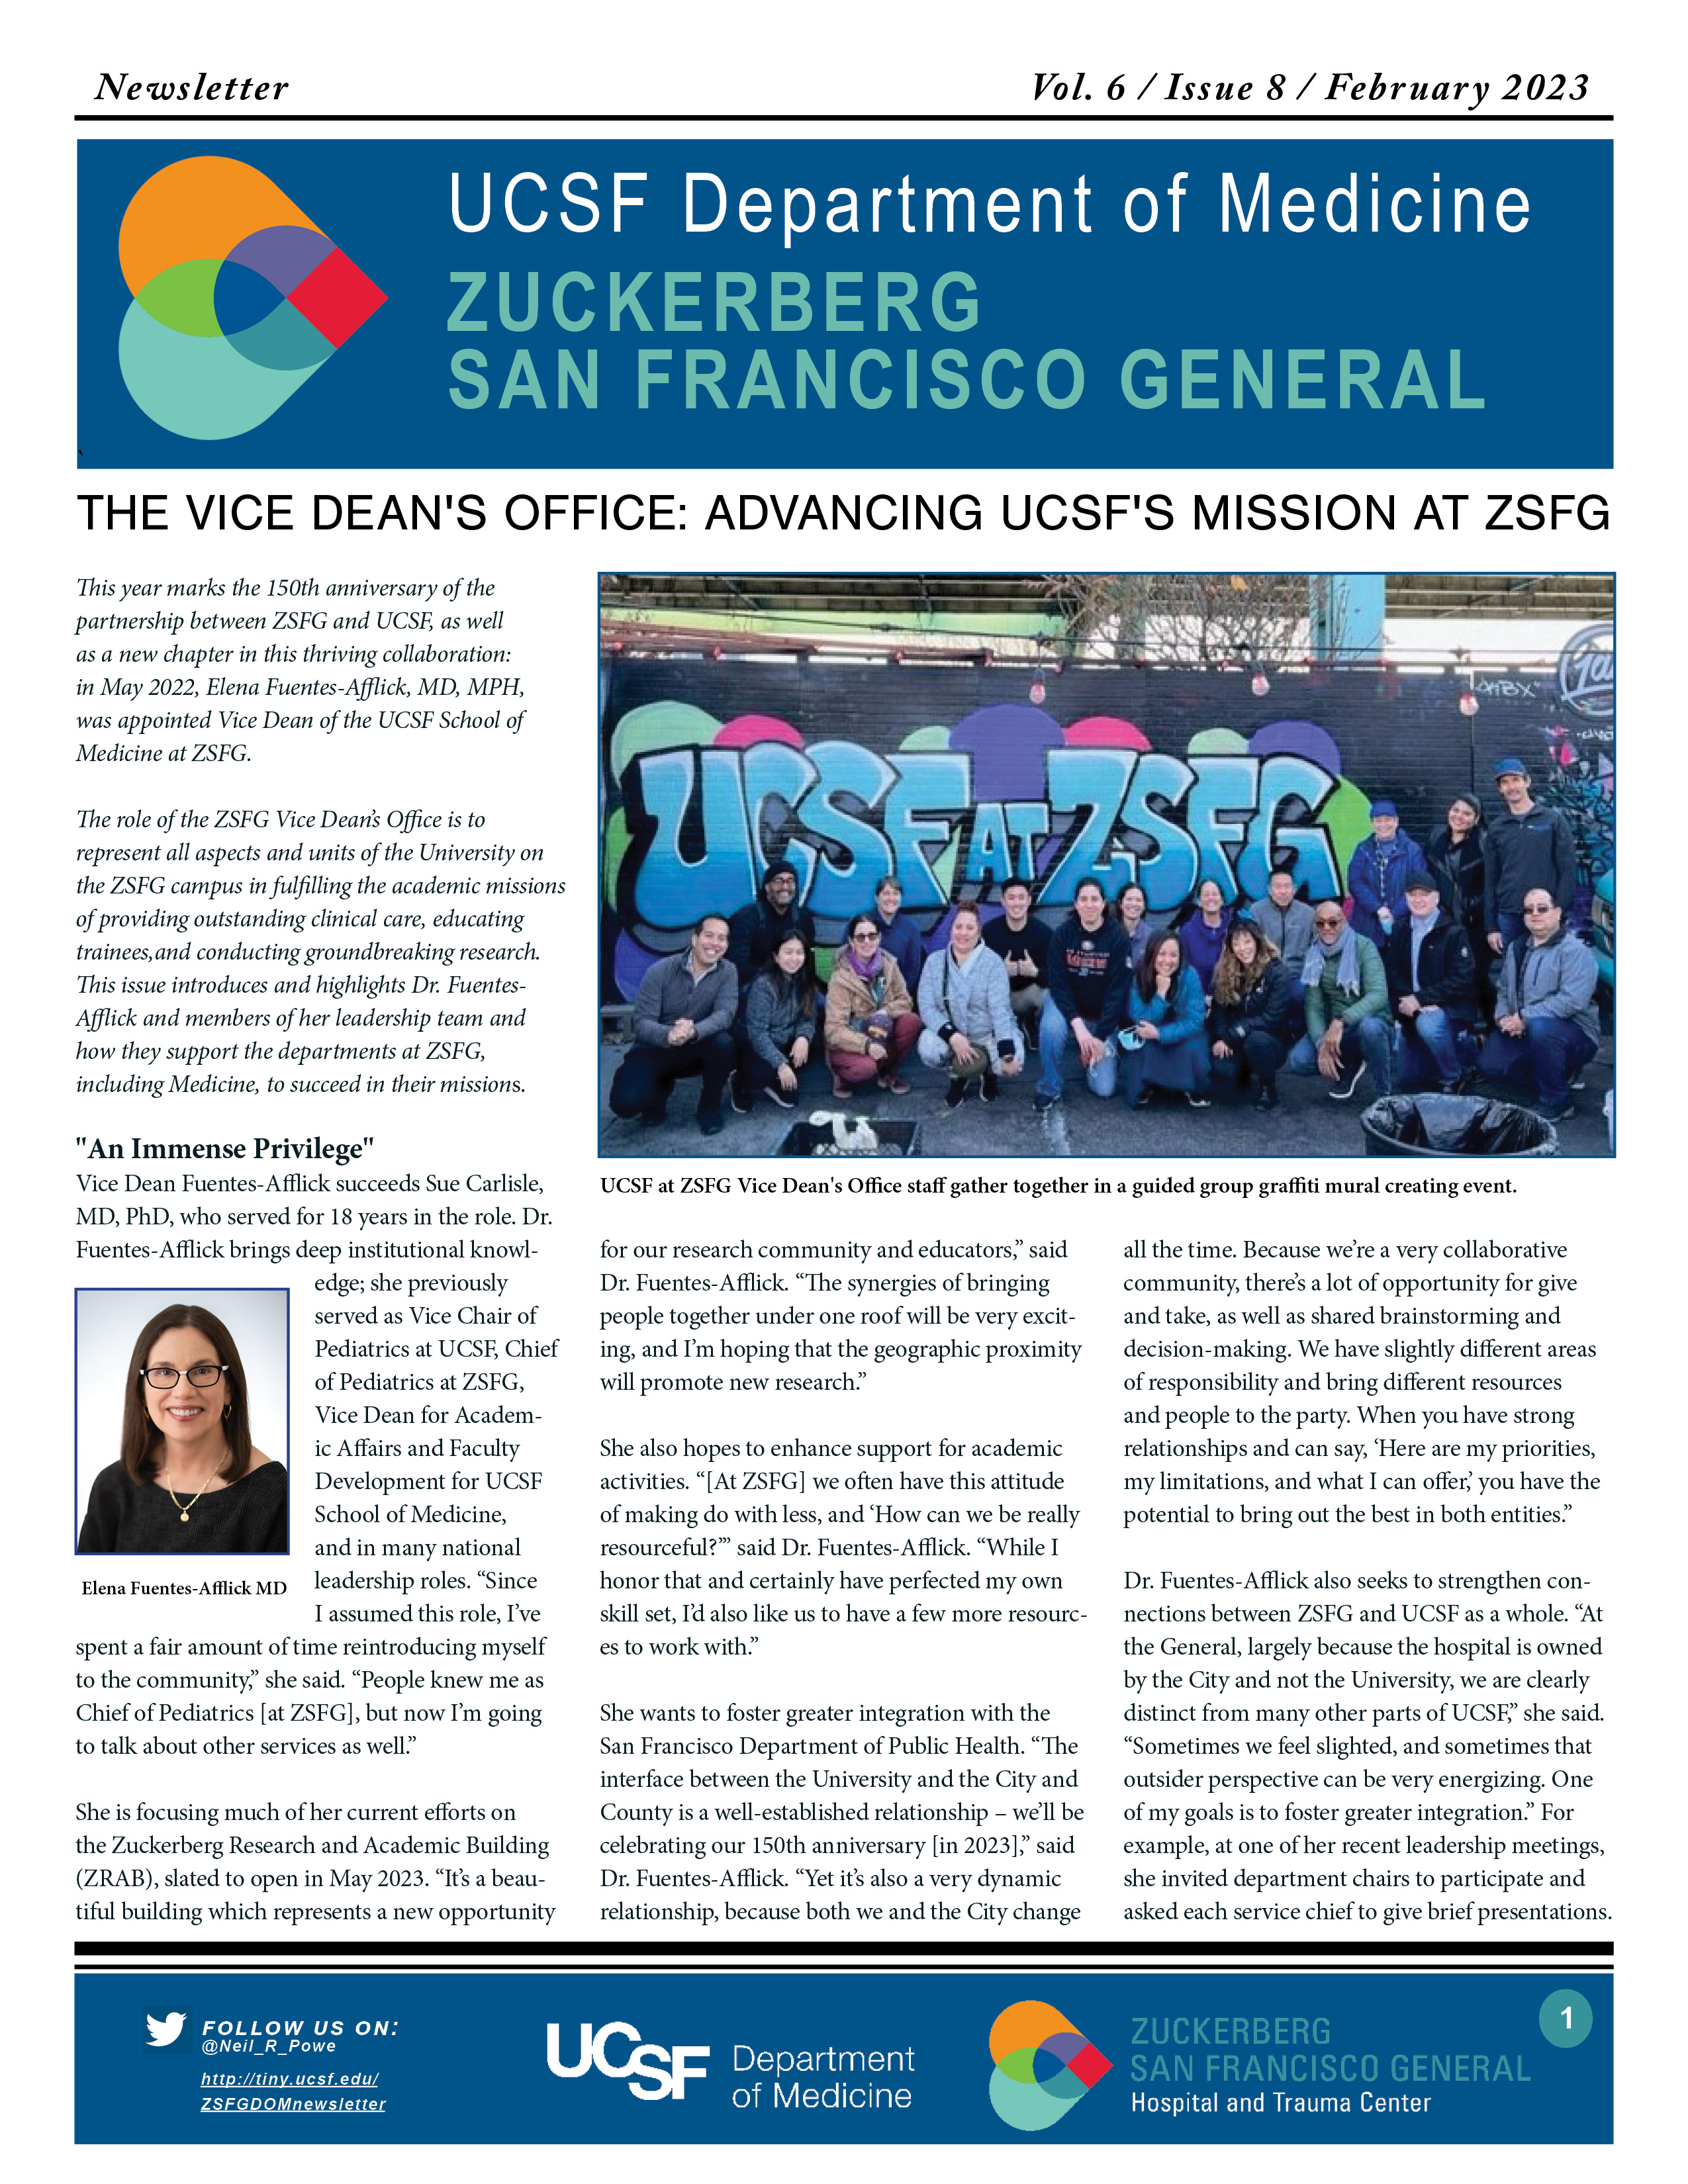 Front page of newspaper with photo of Vice Deans office staff standing in front of graffiti mural that reads UCSF at ZSFG. They are smiling. Below is a headshot photo of Vice Dean Fuentes-Afflick